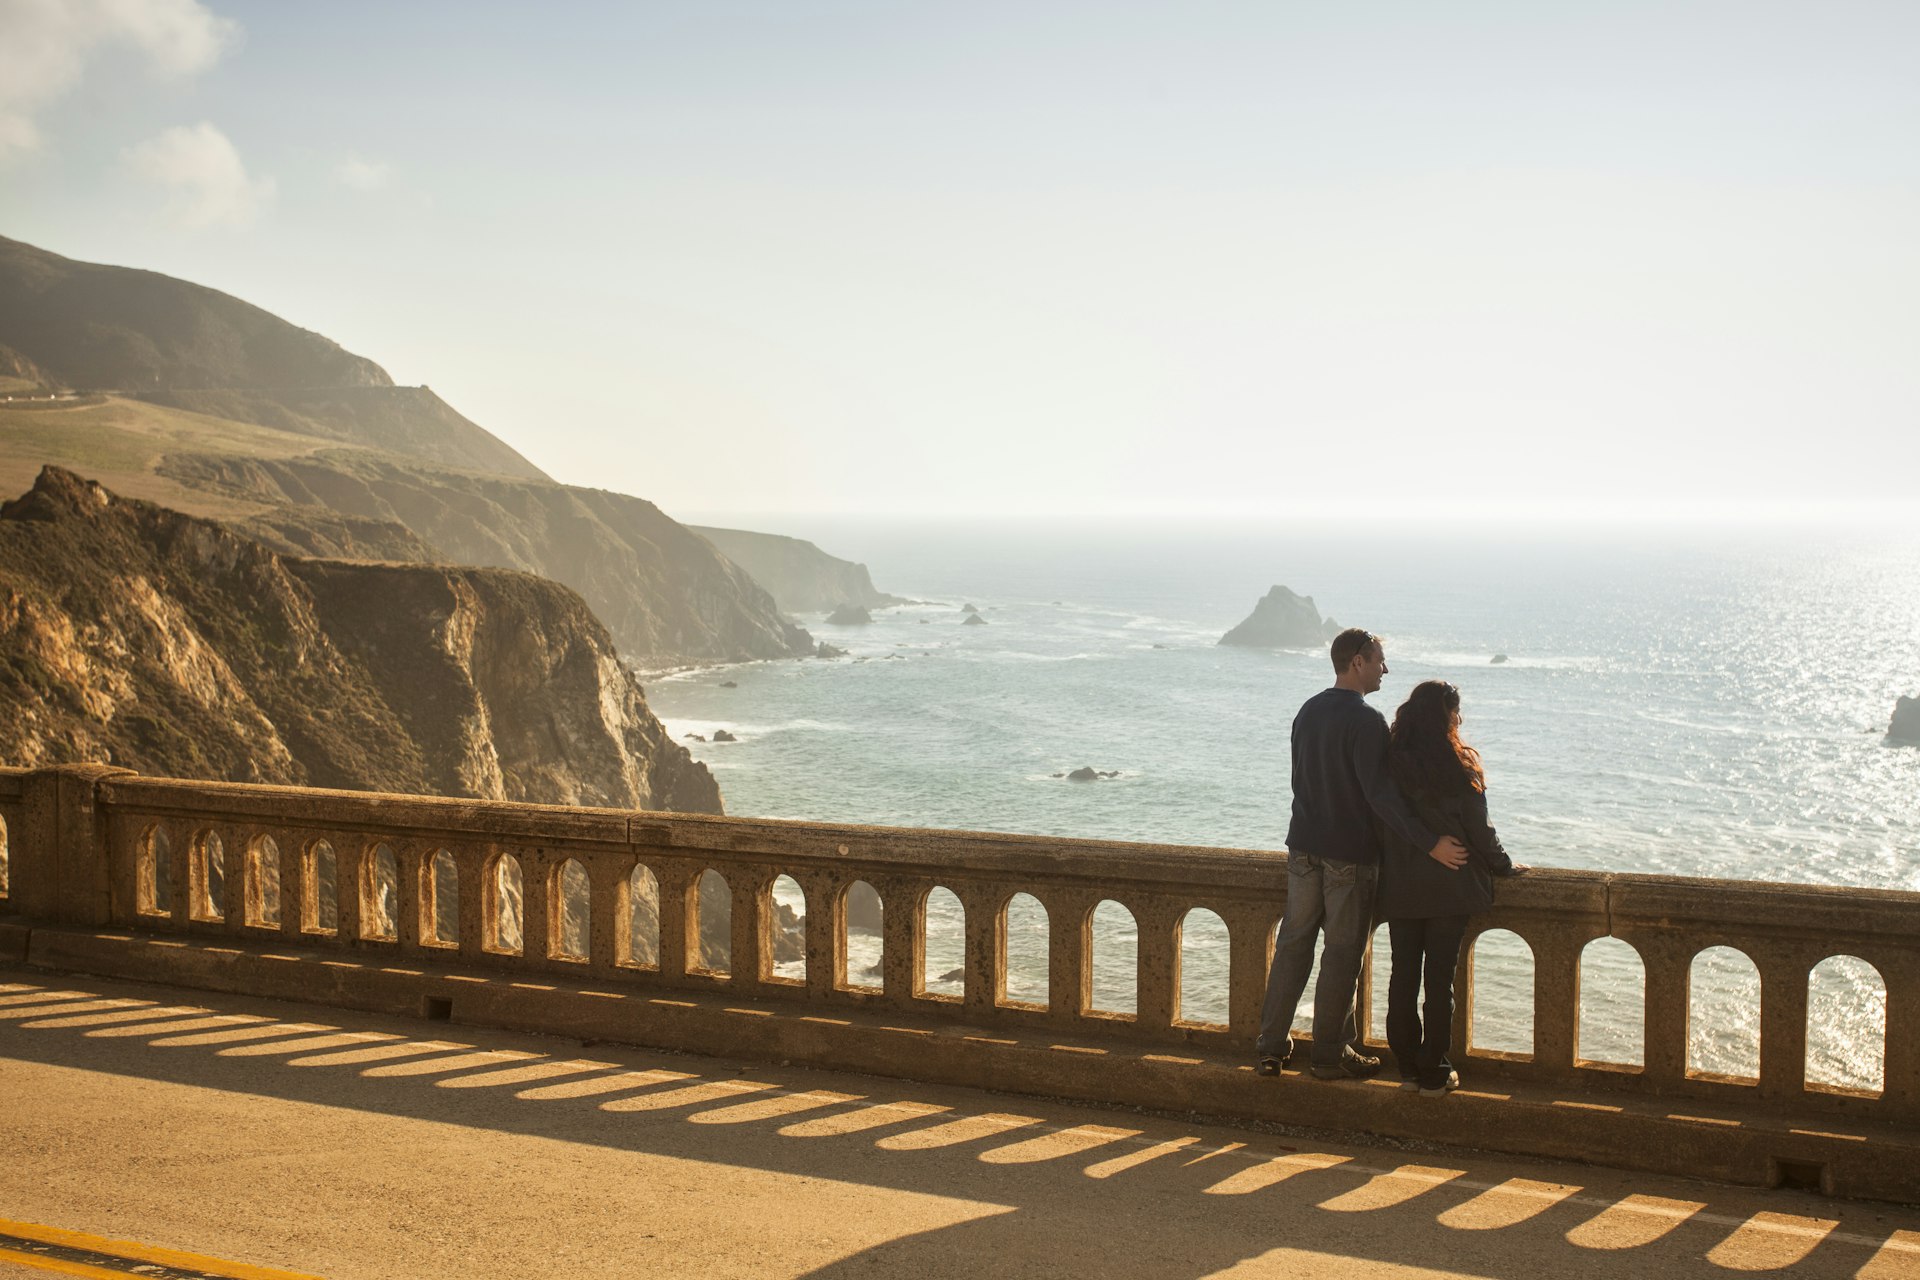 A couple standing on the Bixby Bridge, looking over the view, on highway 1 near the rocky Big Sur coastline of the Pacific Ocean California, USA